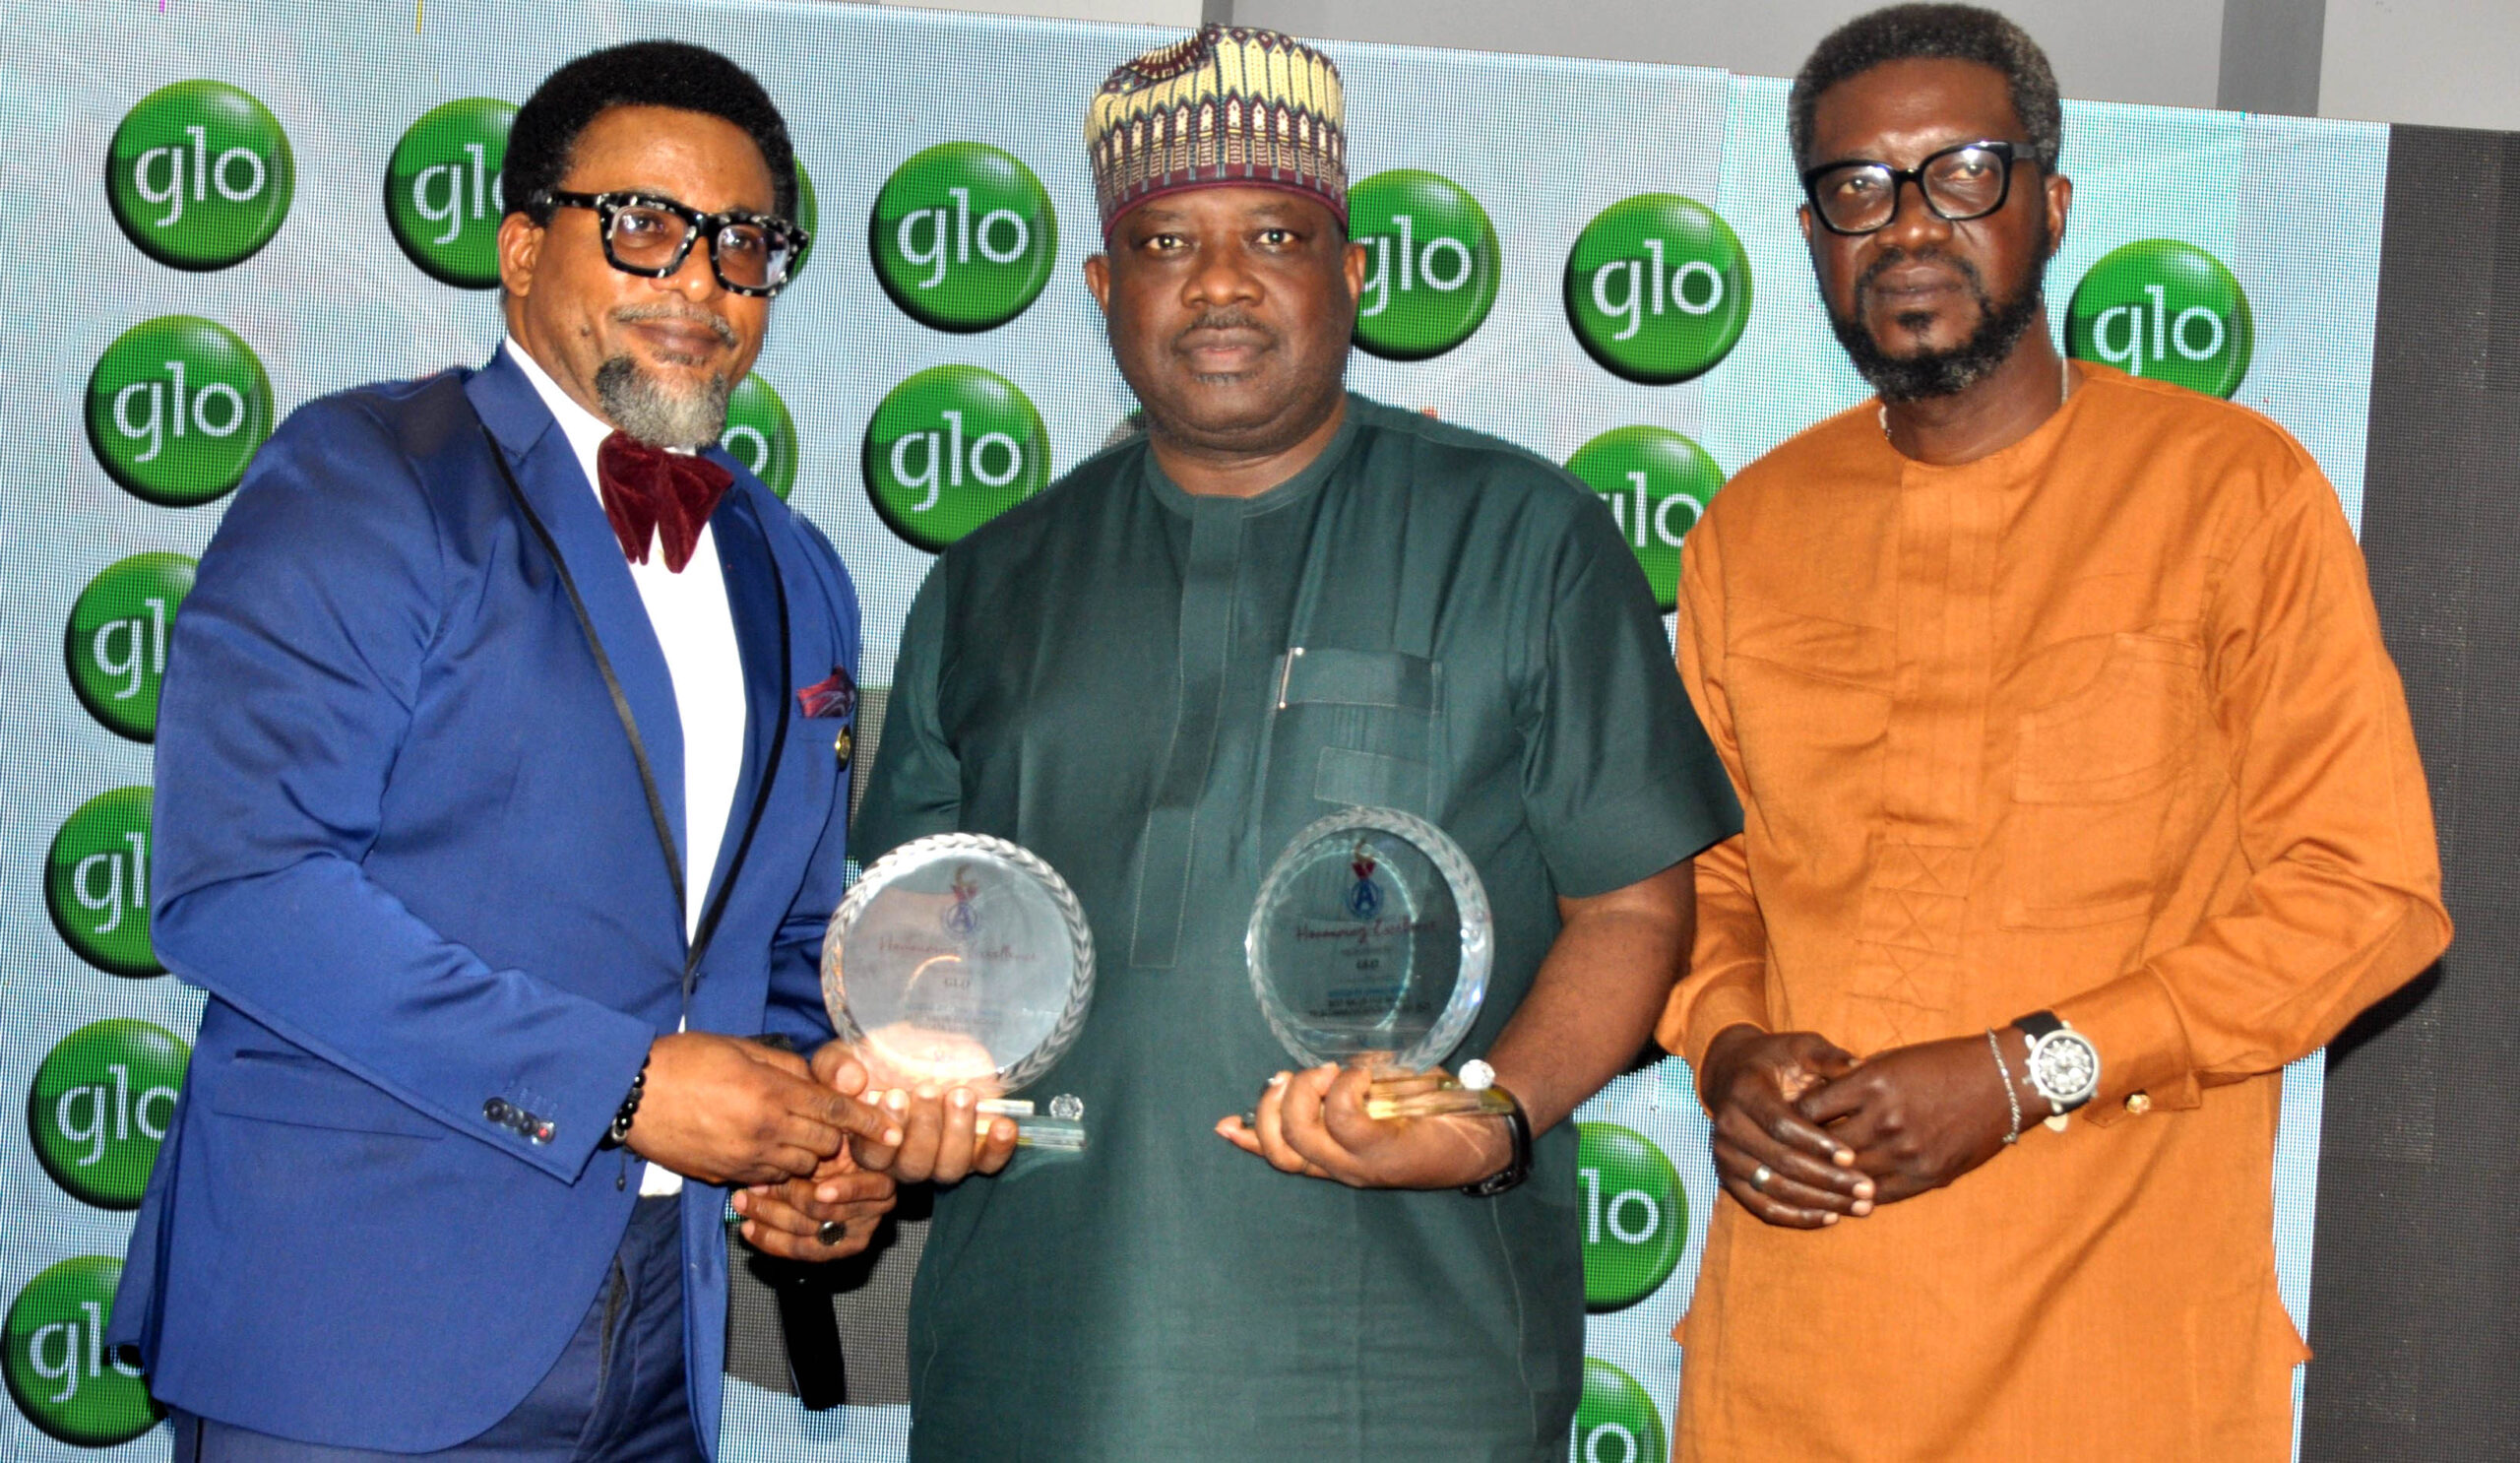 GLO EMERGES OUTSTANDING TELECOM BRAND OF THE YEAR